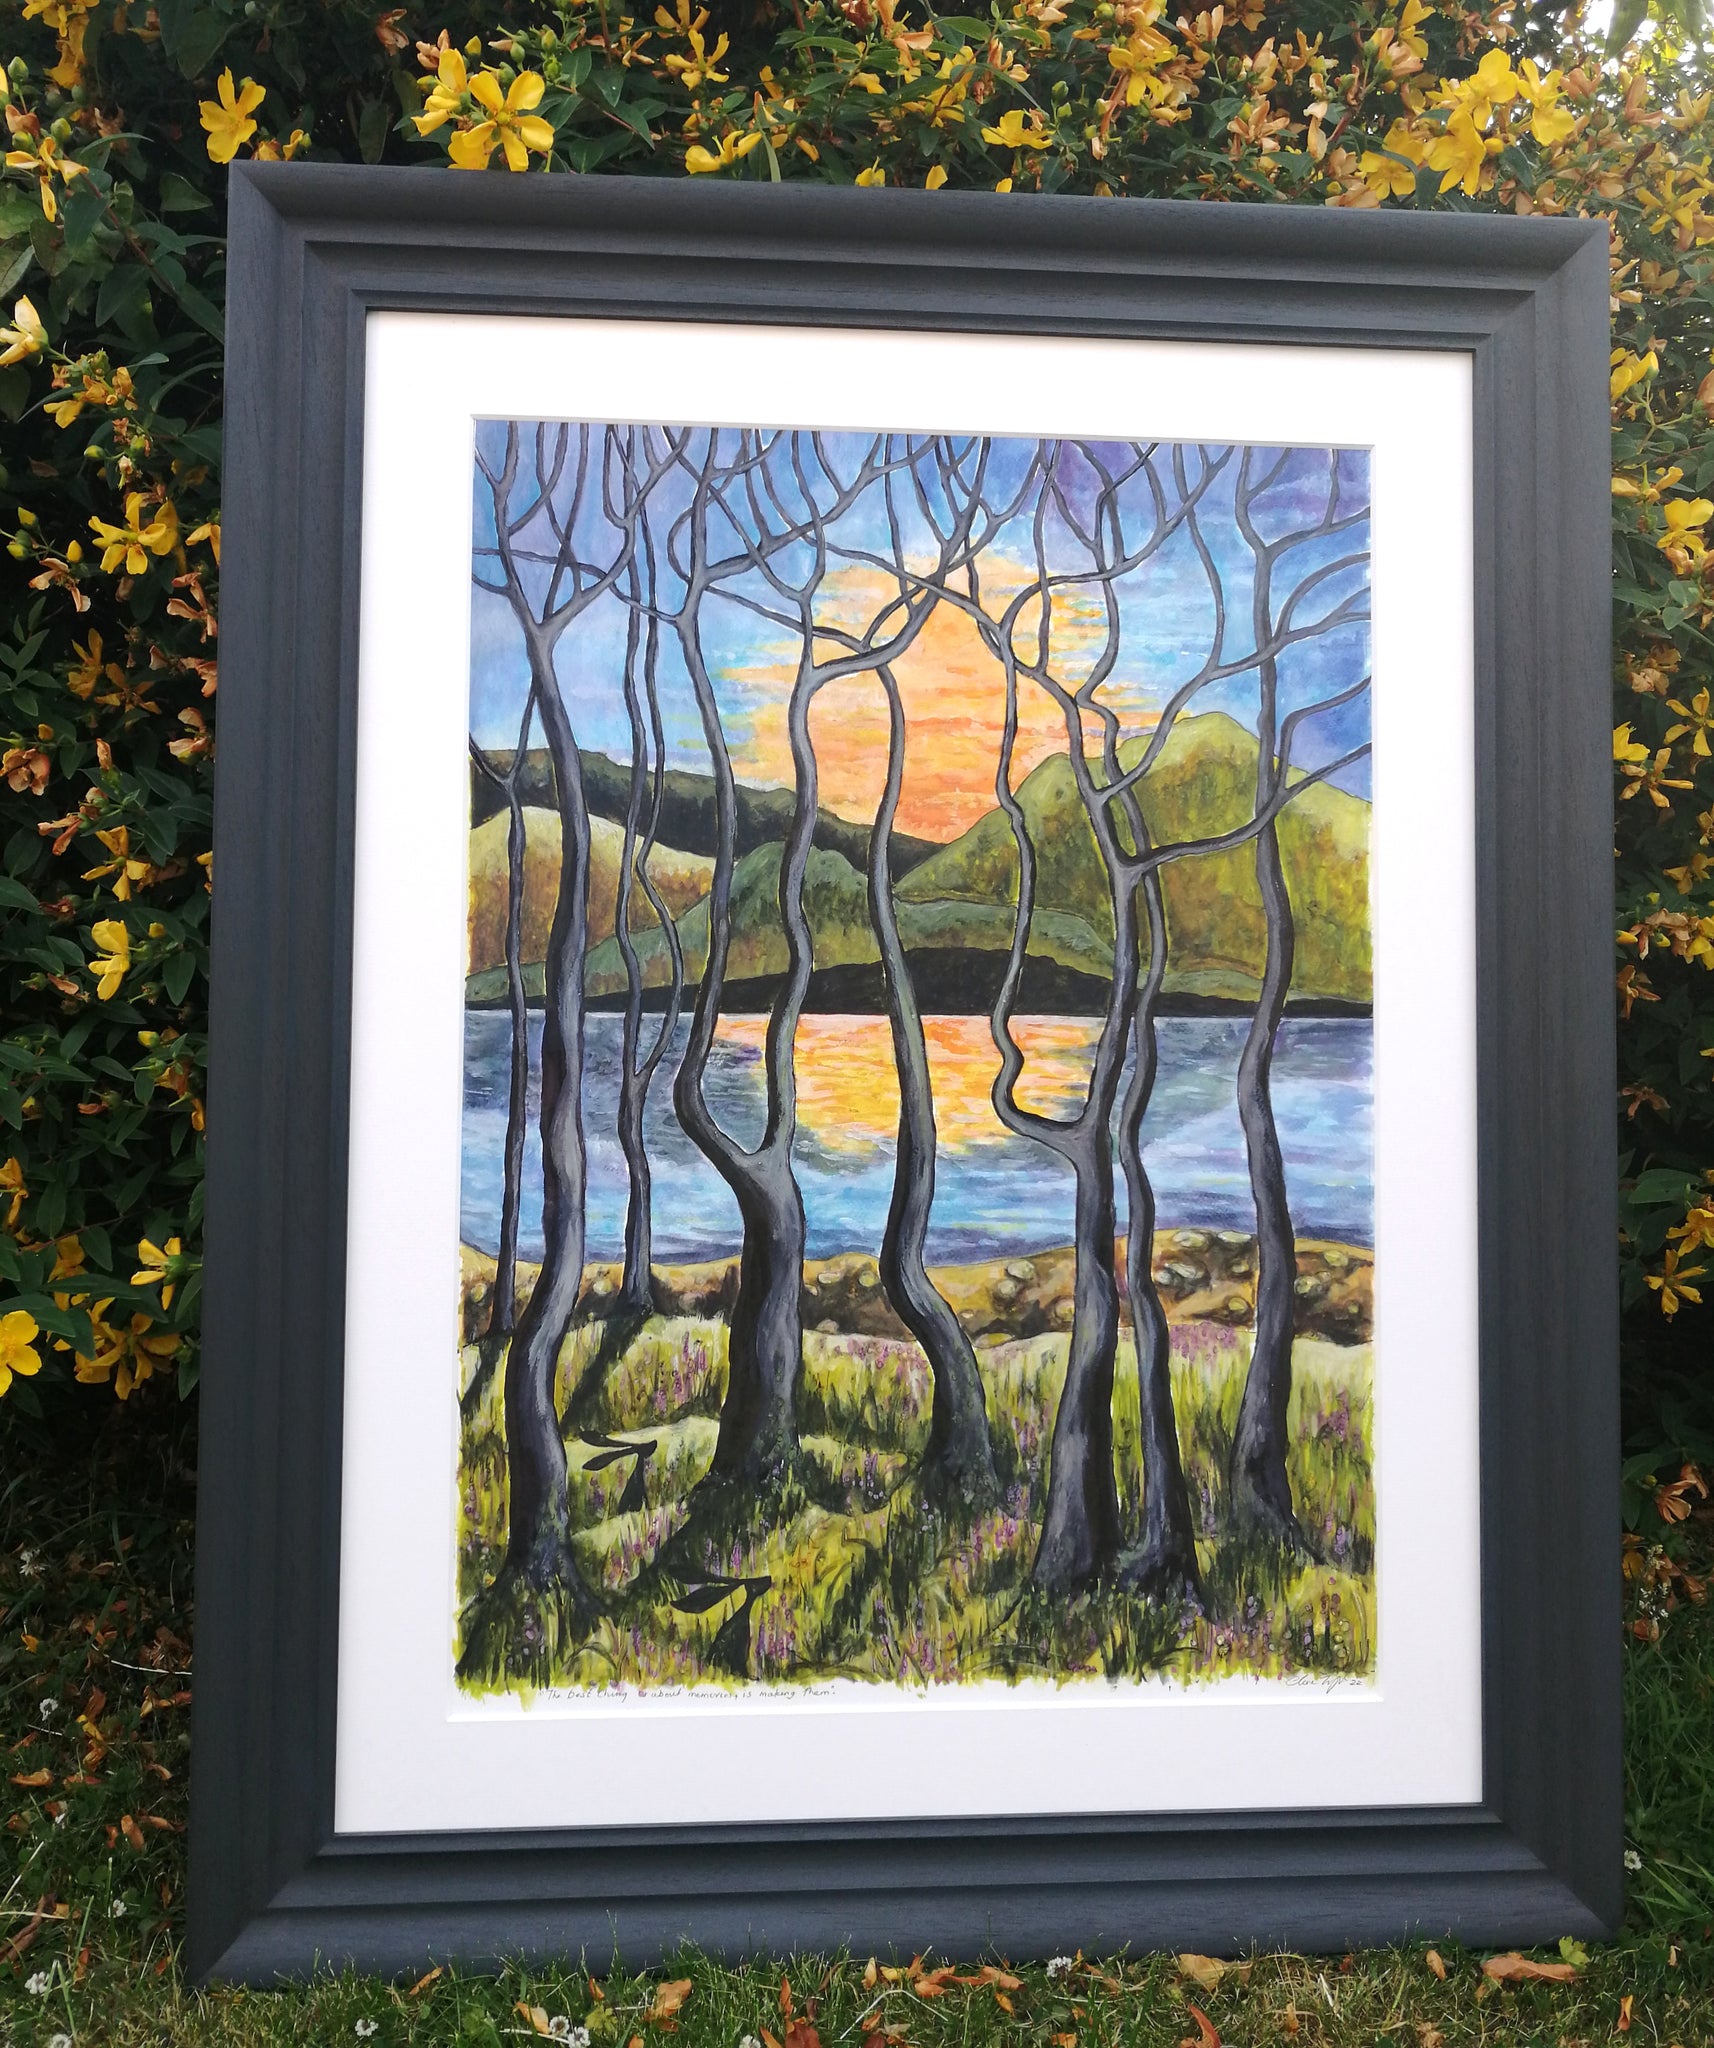 The best thing about memories is making them. Original signed Art, Framed as shown in colour Railings (Farrow & Ball) Frame size 72cm wide by 92cm high.